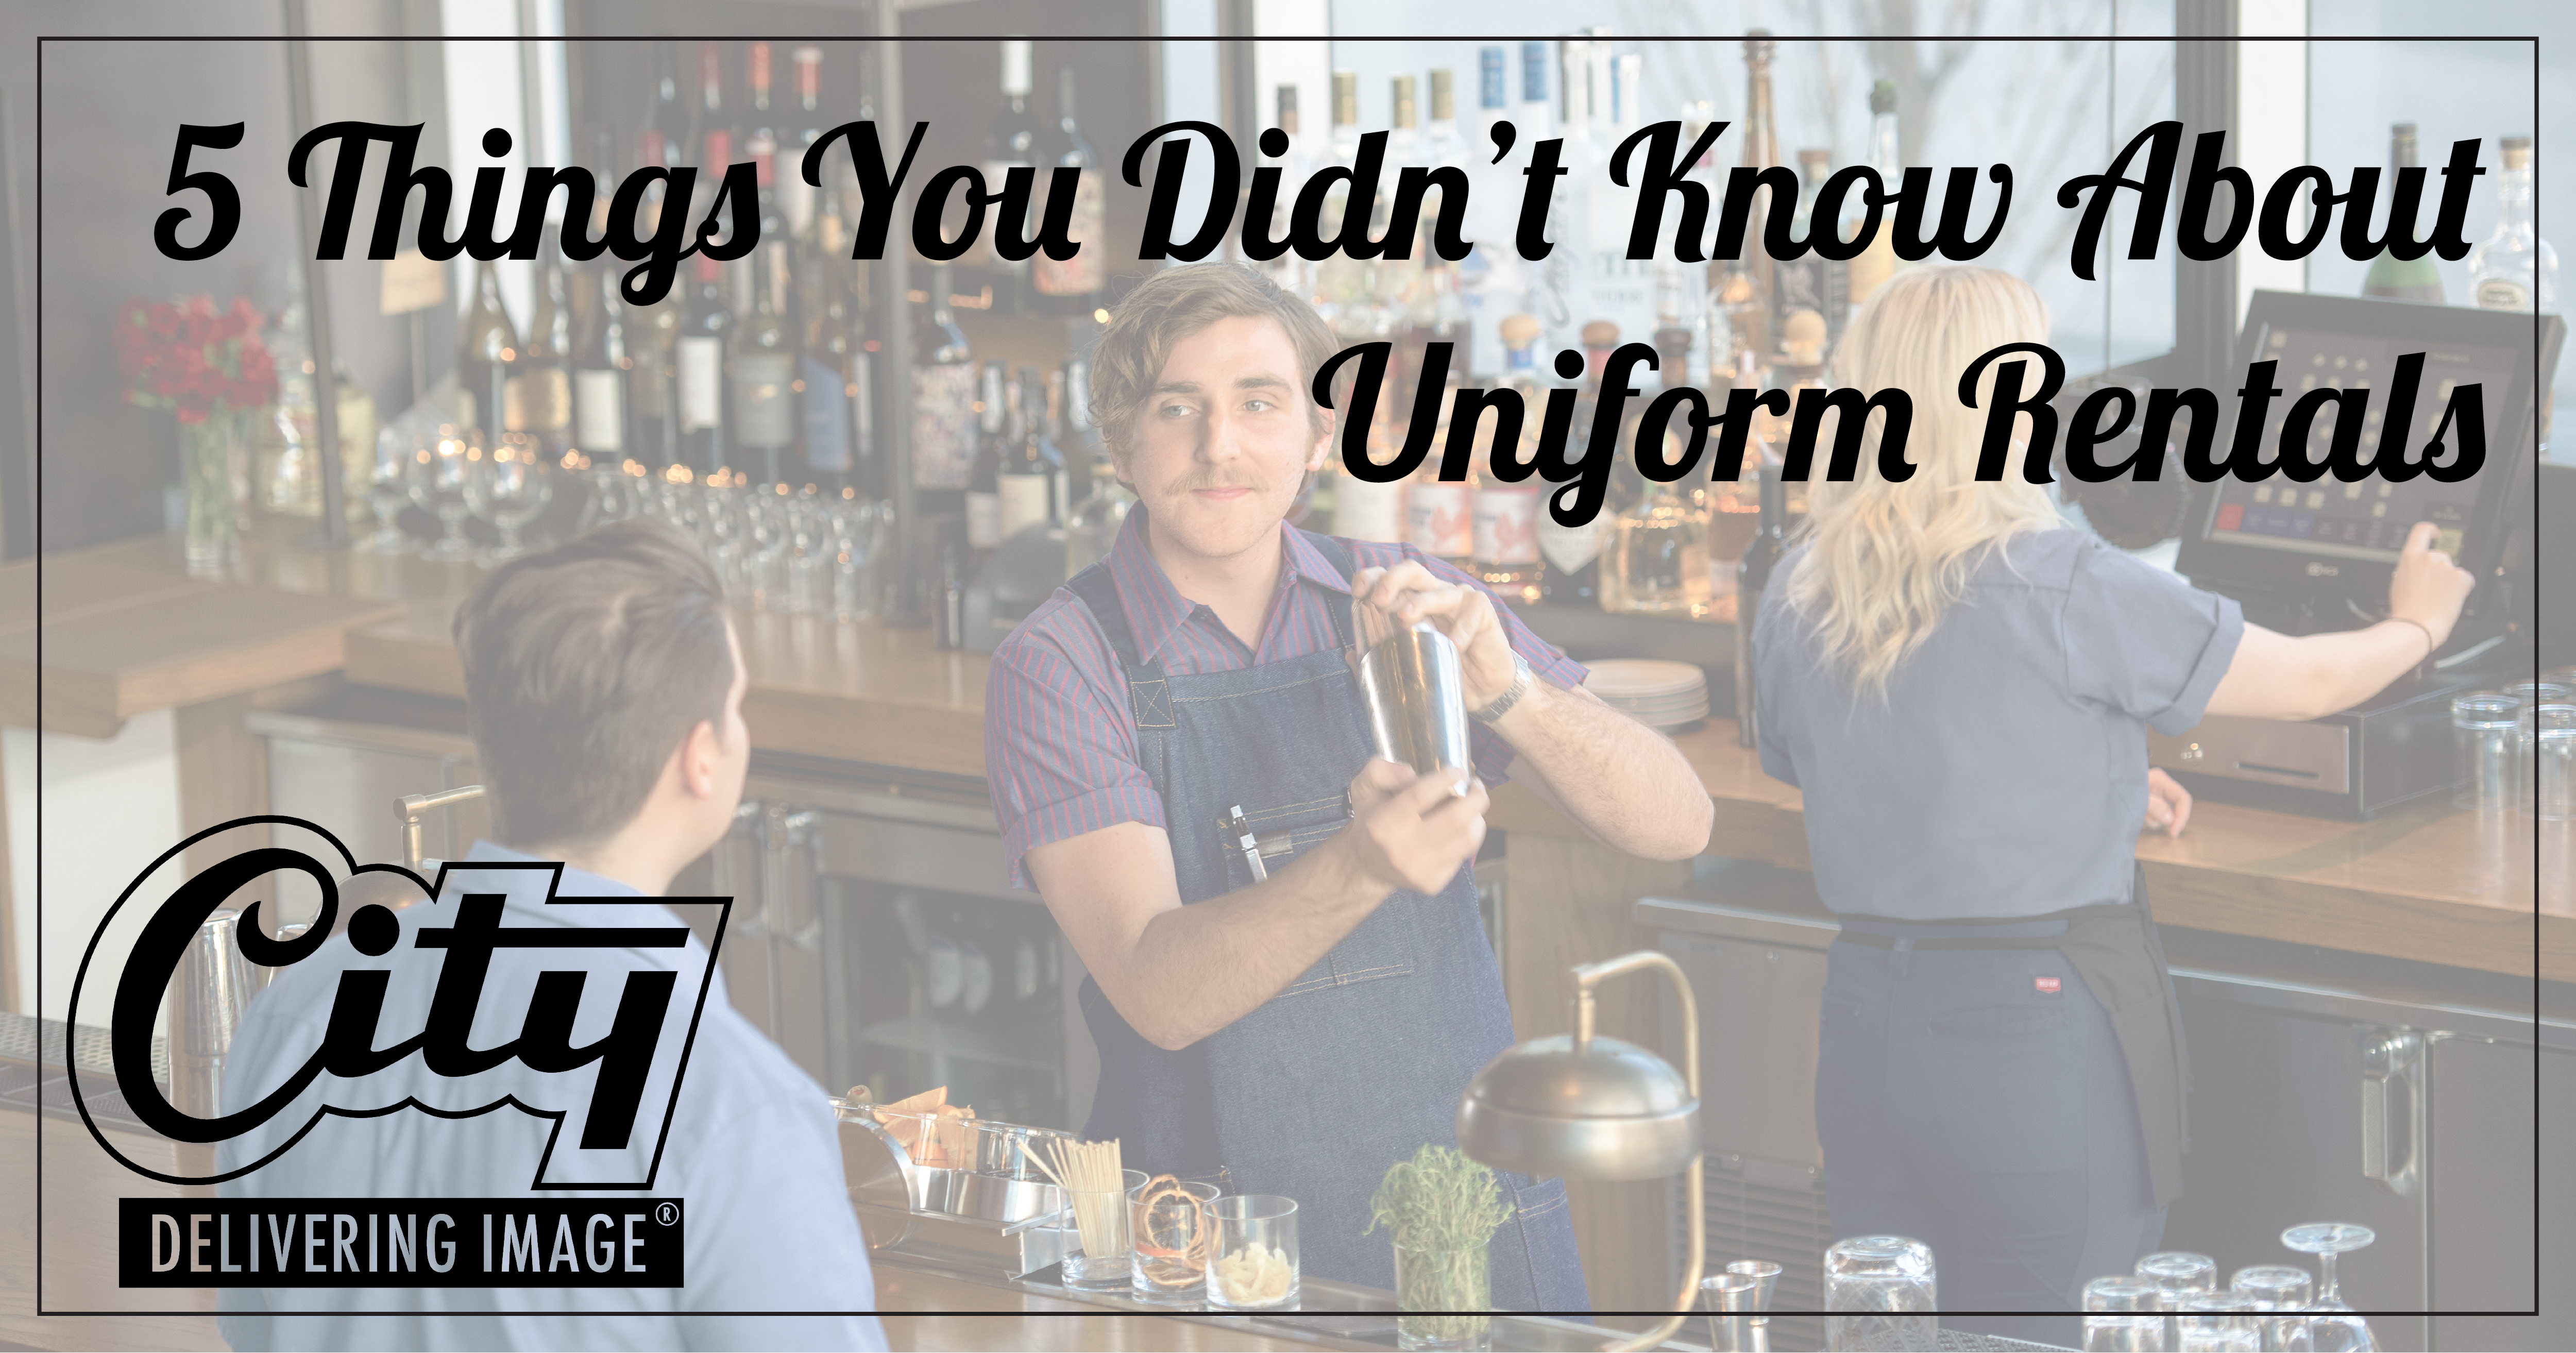 5 things you didn't know about uniform rentals